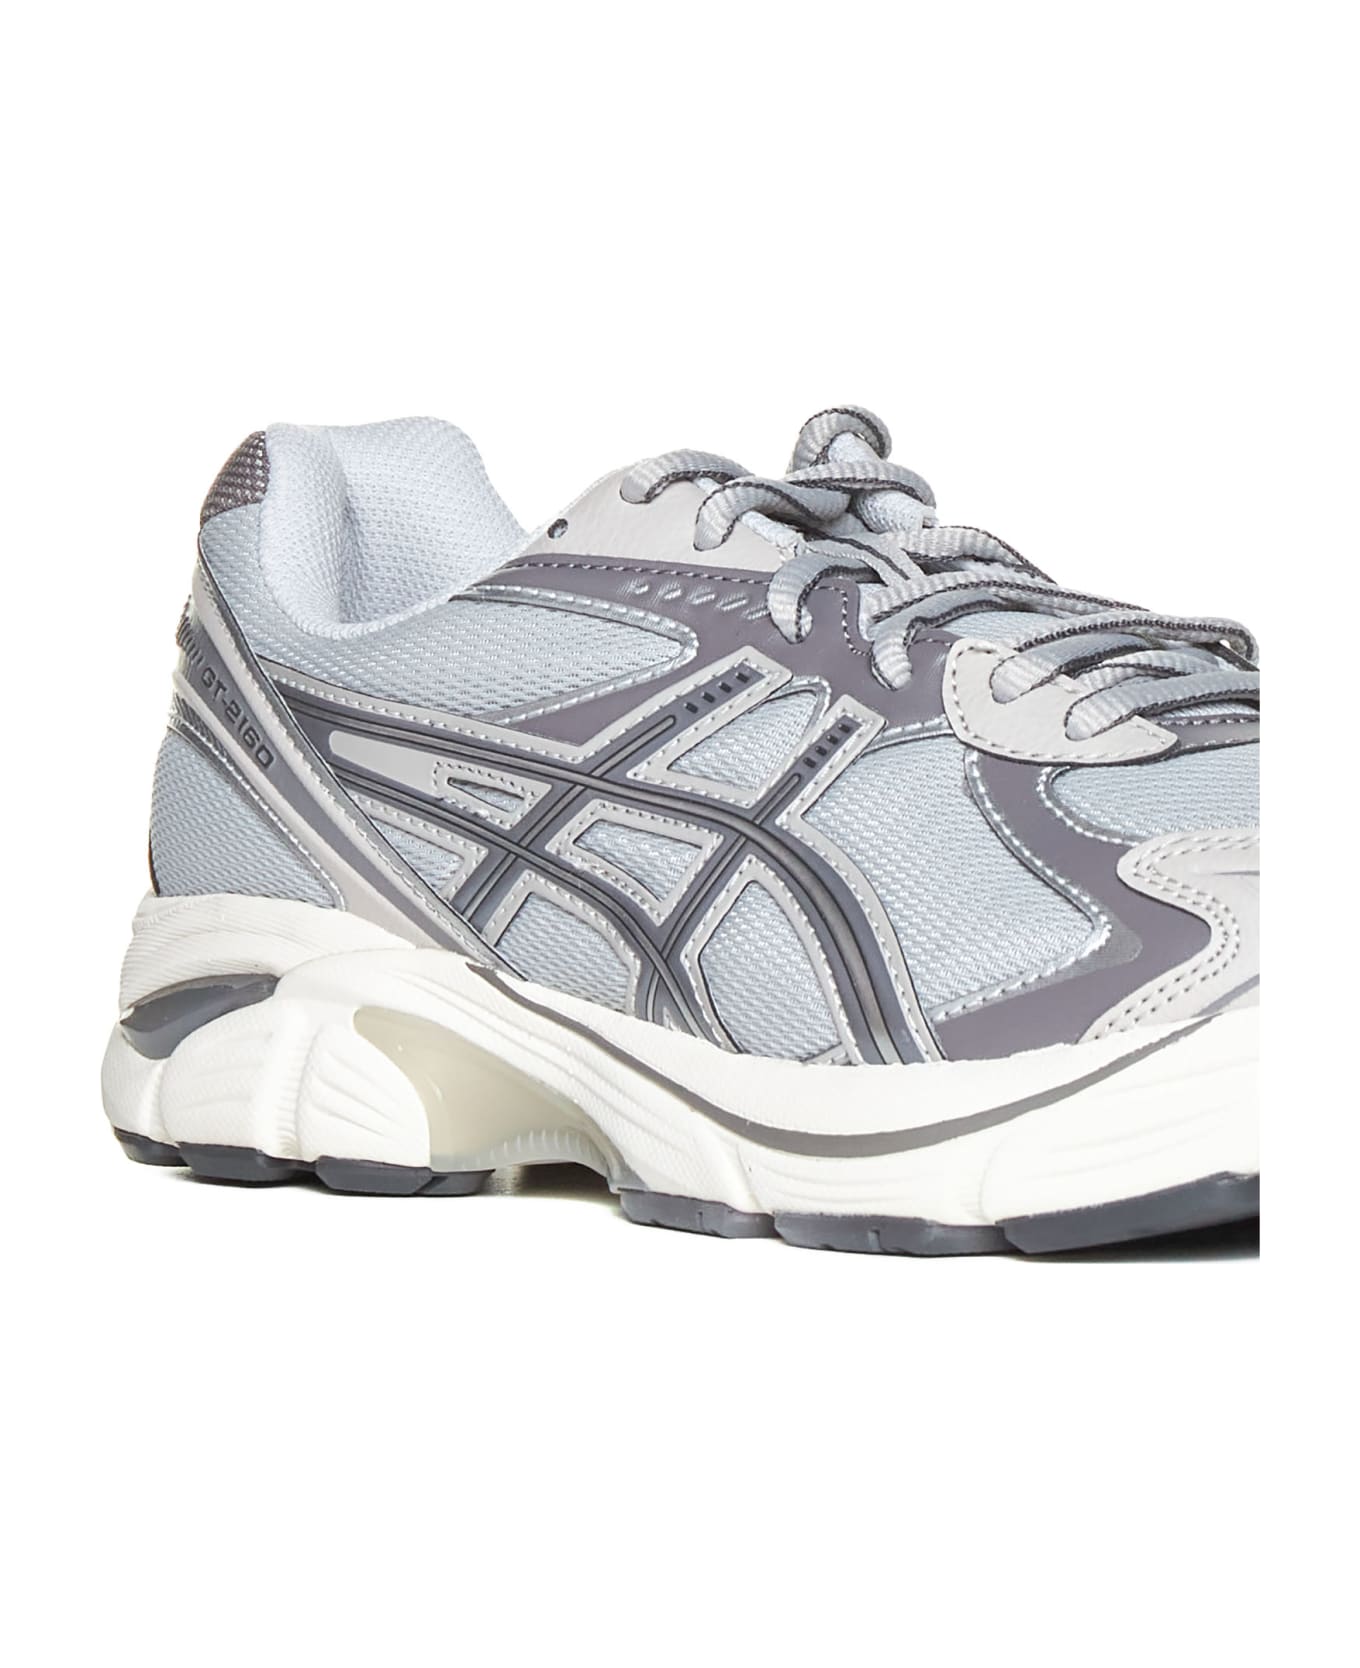 Asics Sneakers - Oyster grey/carbon